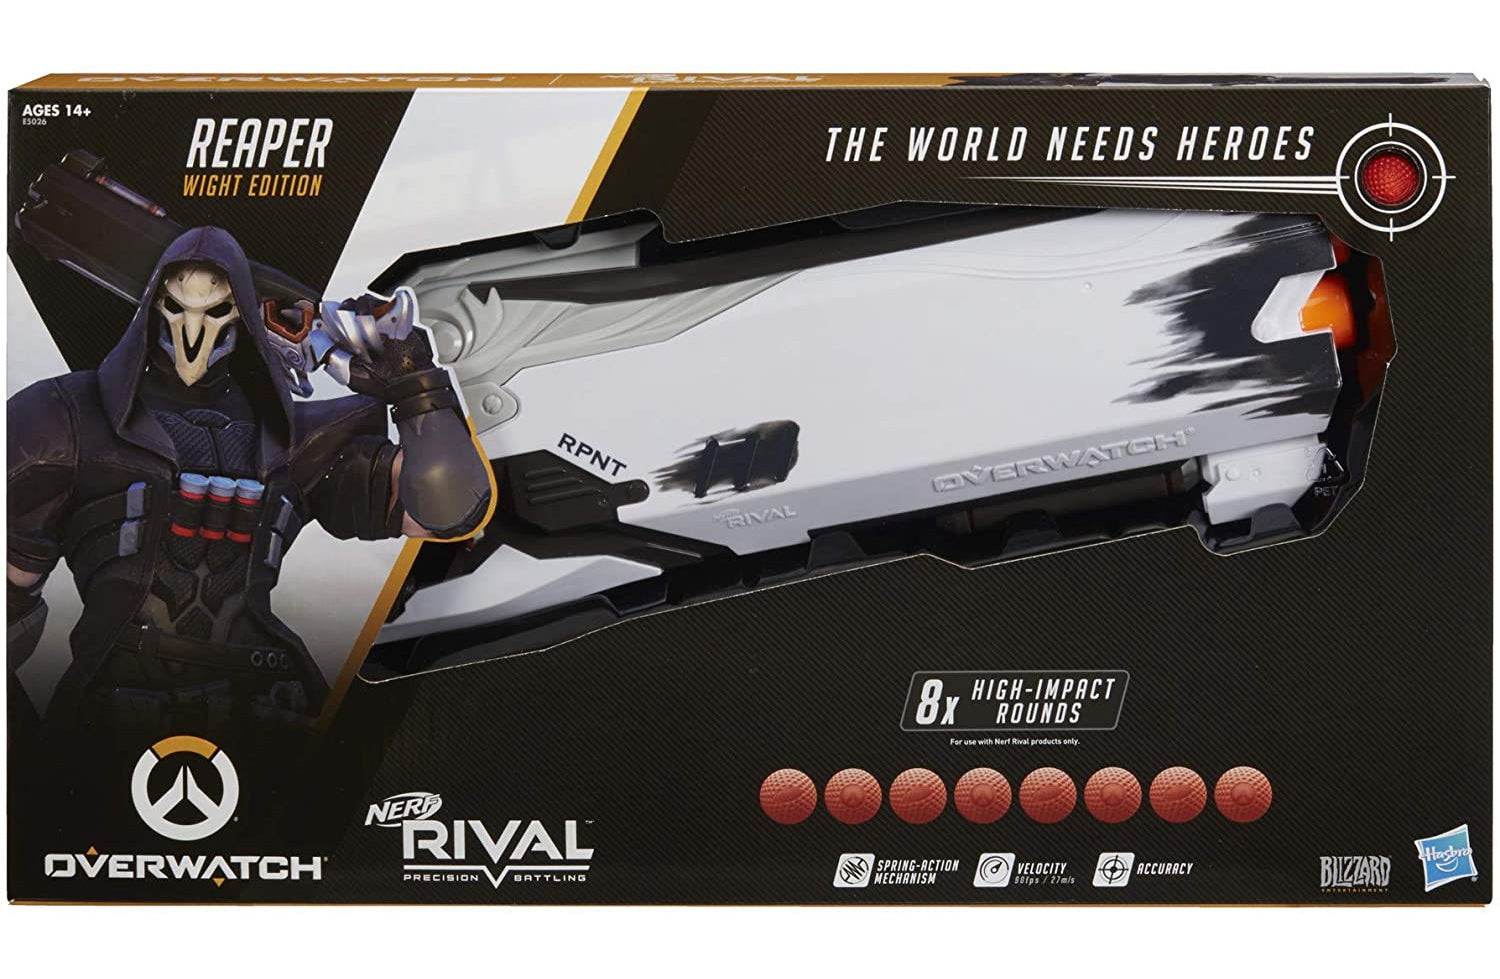 Nerf Overwatch Reaper (Wight Edition) & 8 Overwatch Nerf Rival Rounds